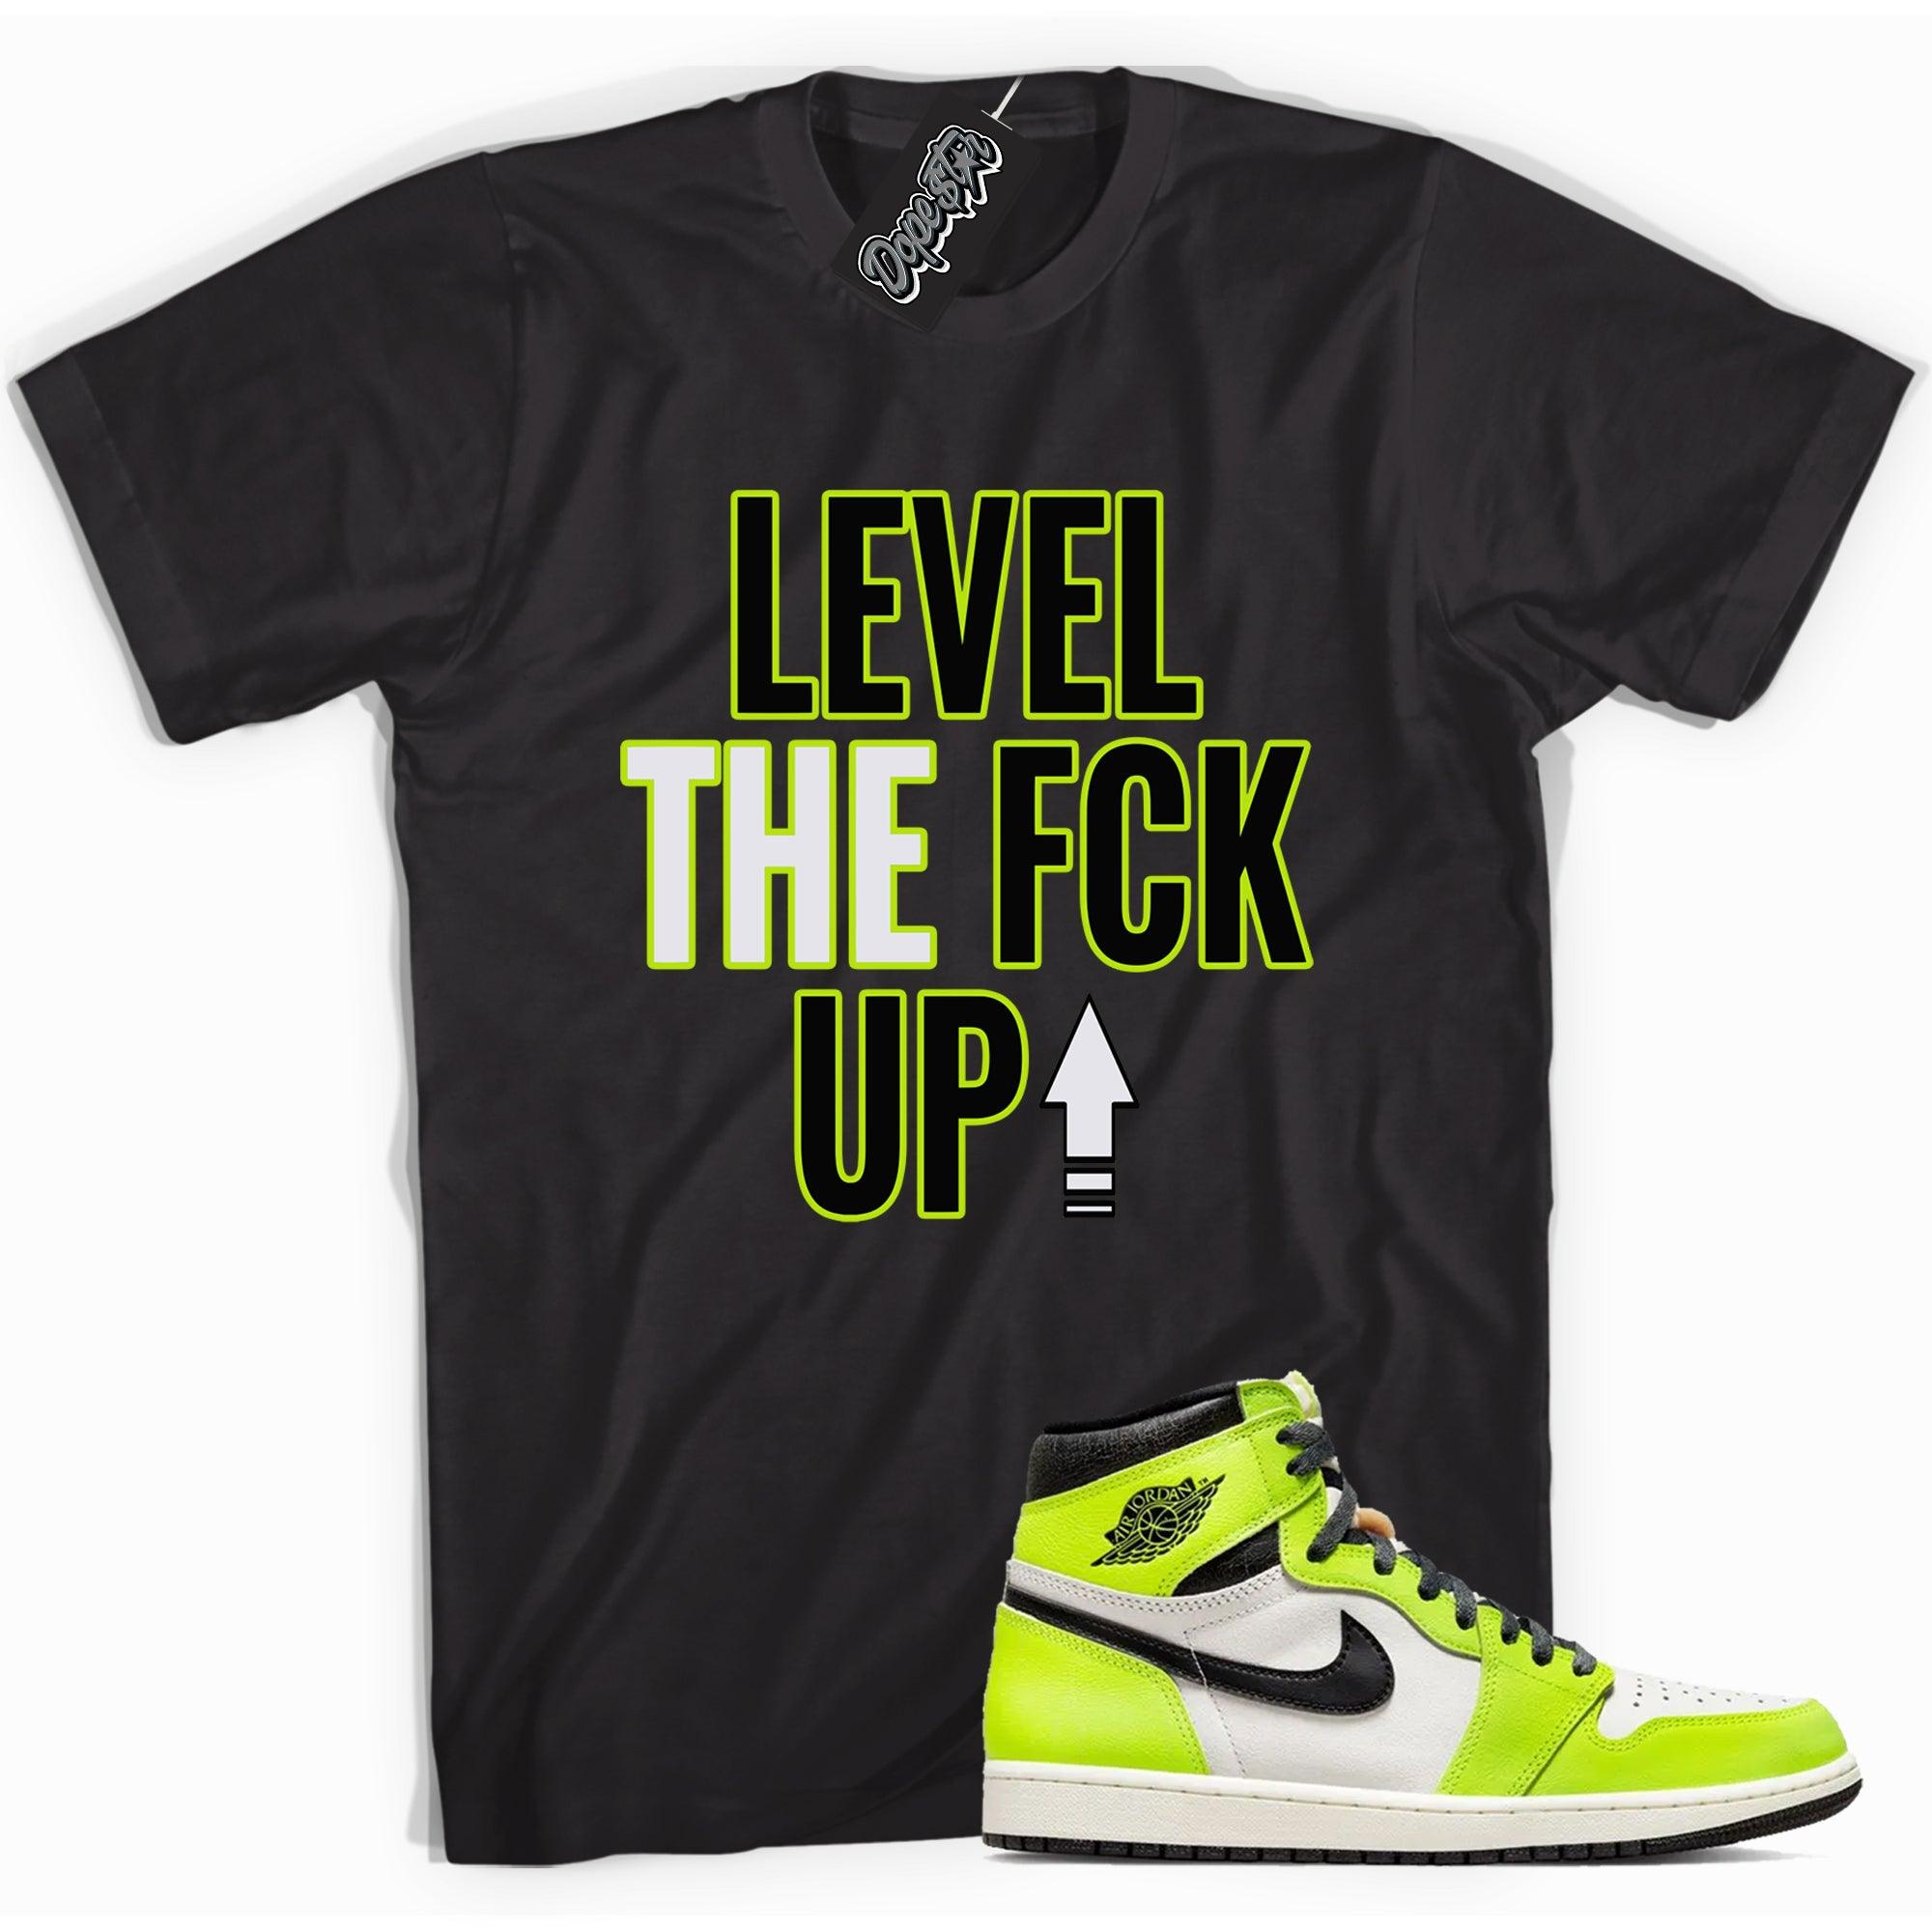 Cool black graphic tee with 'Level Up' print, that perfectly matches Air Jordan 1 high OG Visionaire sneakers.